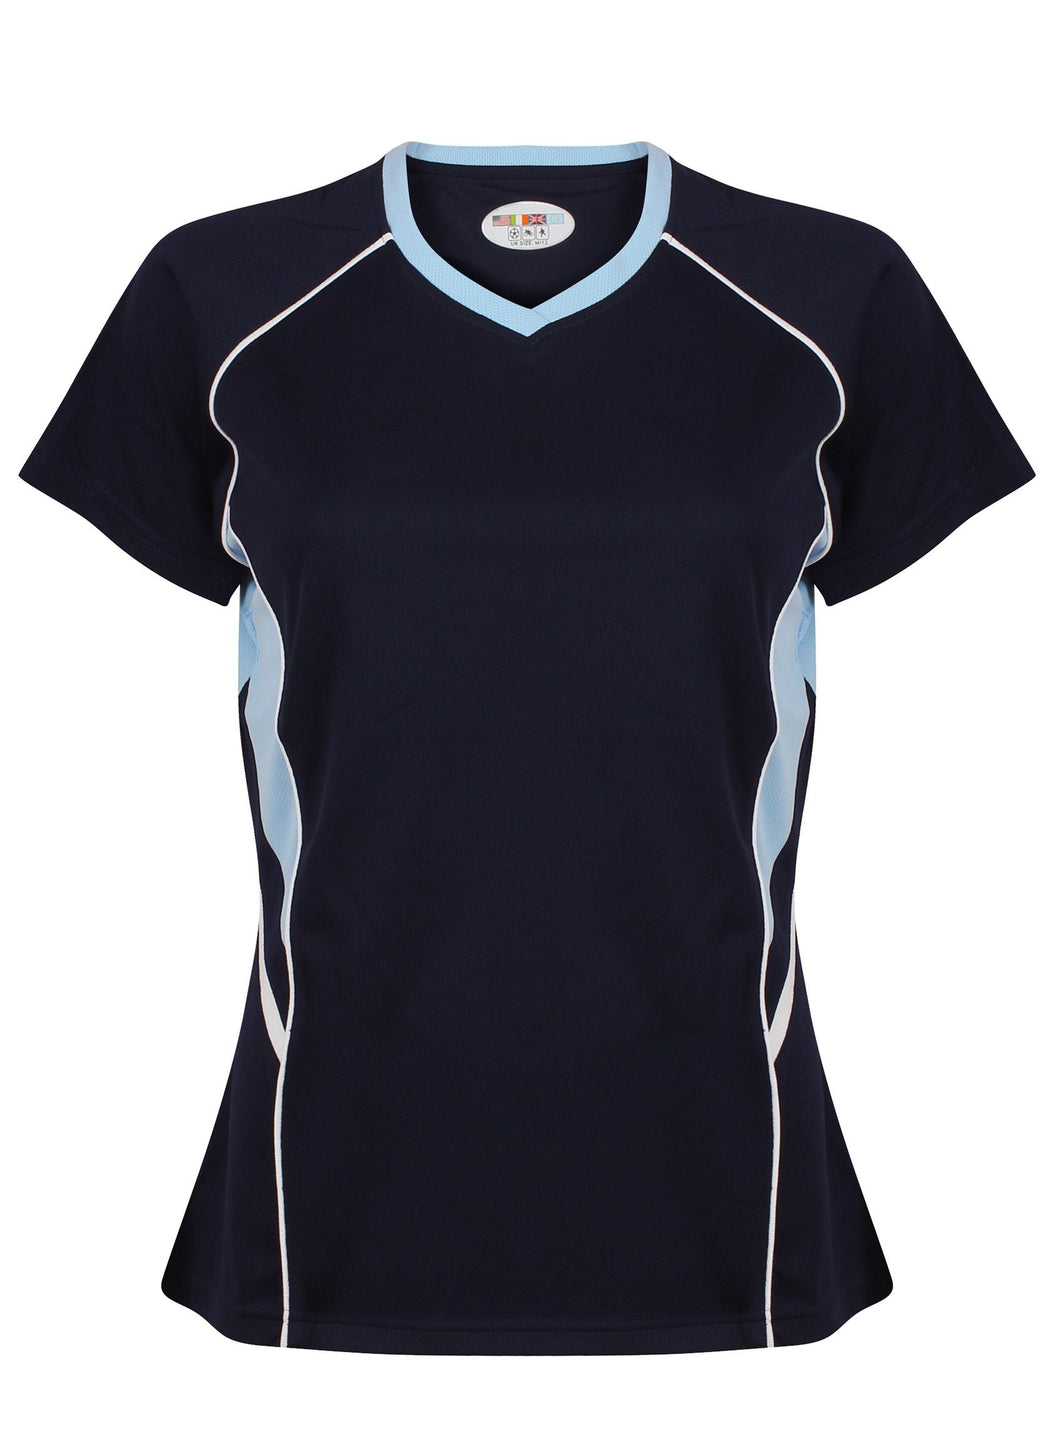 Jenny Ladies Fitted Top Gazelle Sports UK Yes XS/8 Col B) Navy/ Pale Blue/ White